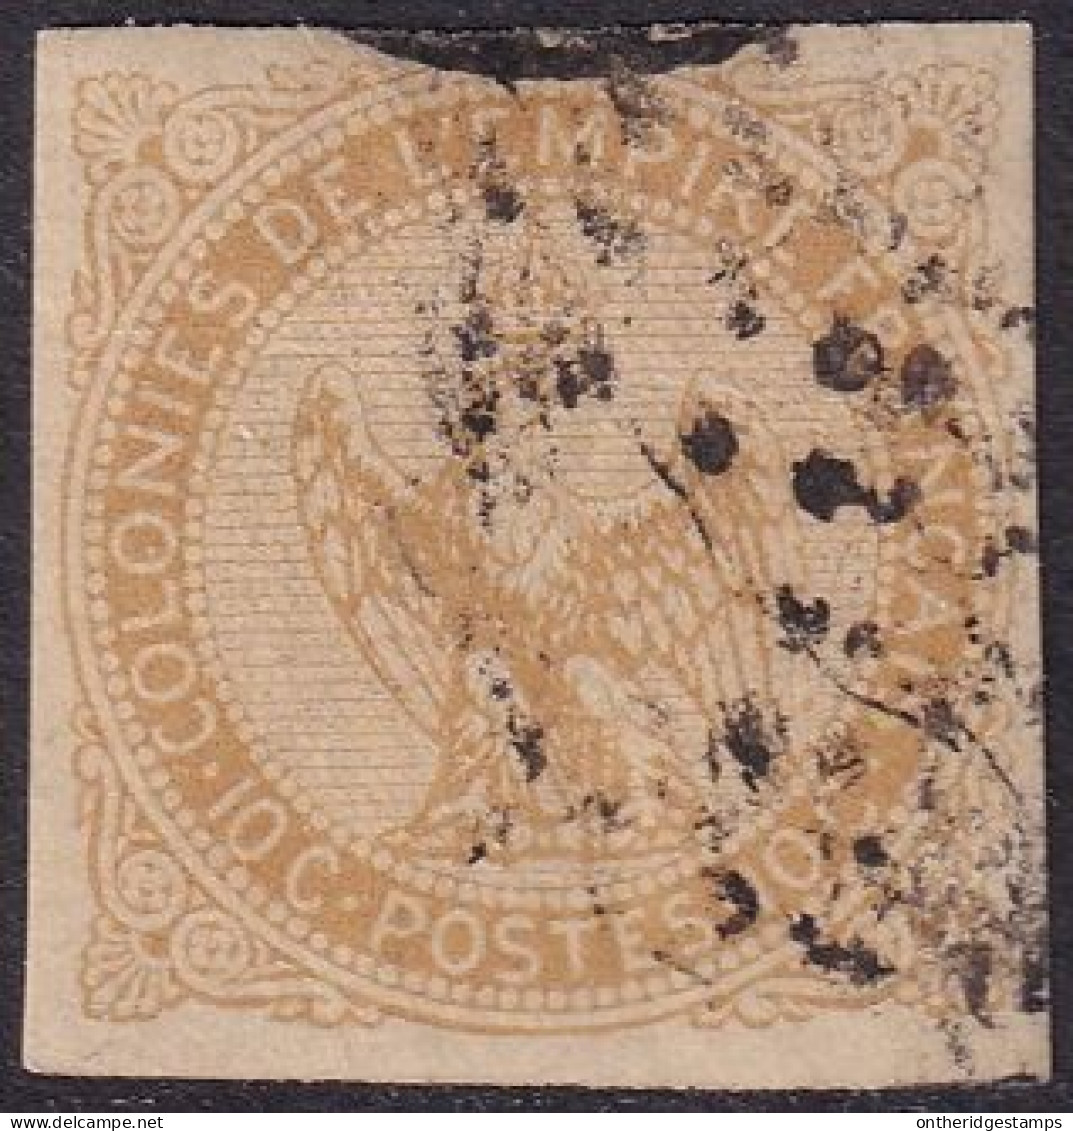 French Colonies 1859 Sc 3 Yt 3 Used Lozenge Cancel Paper Adhesion - Aquila Imperiale